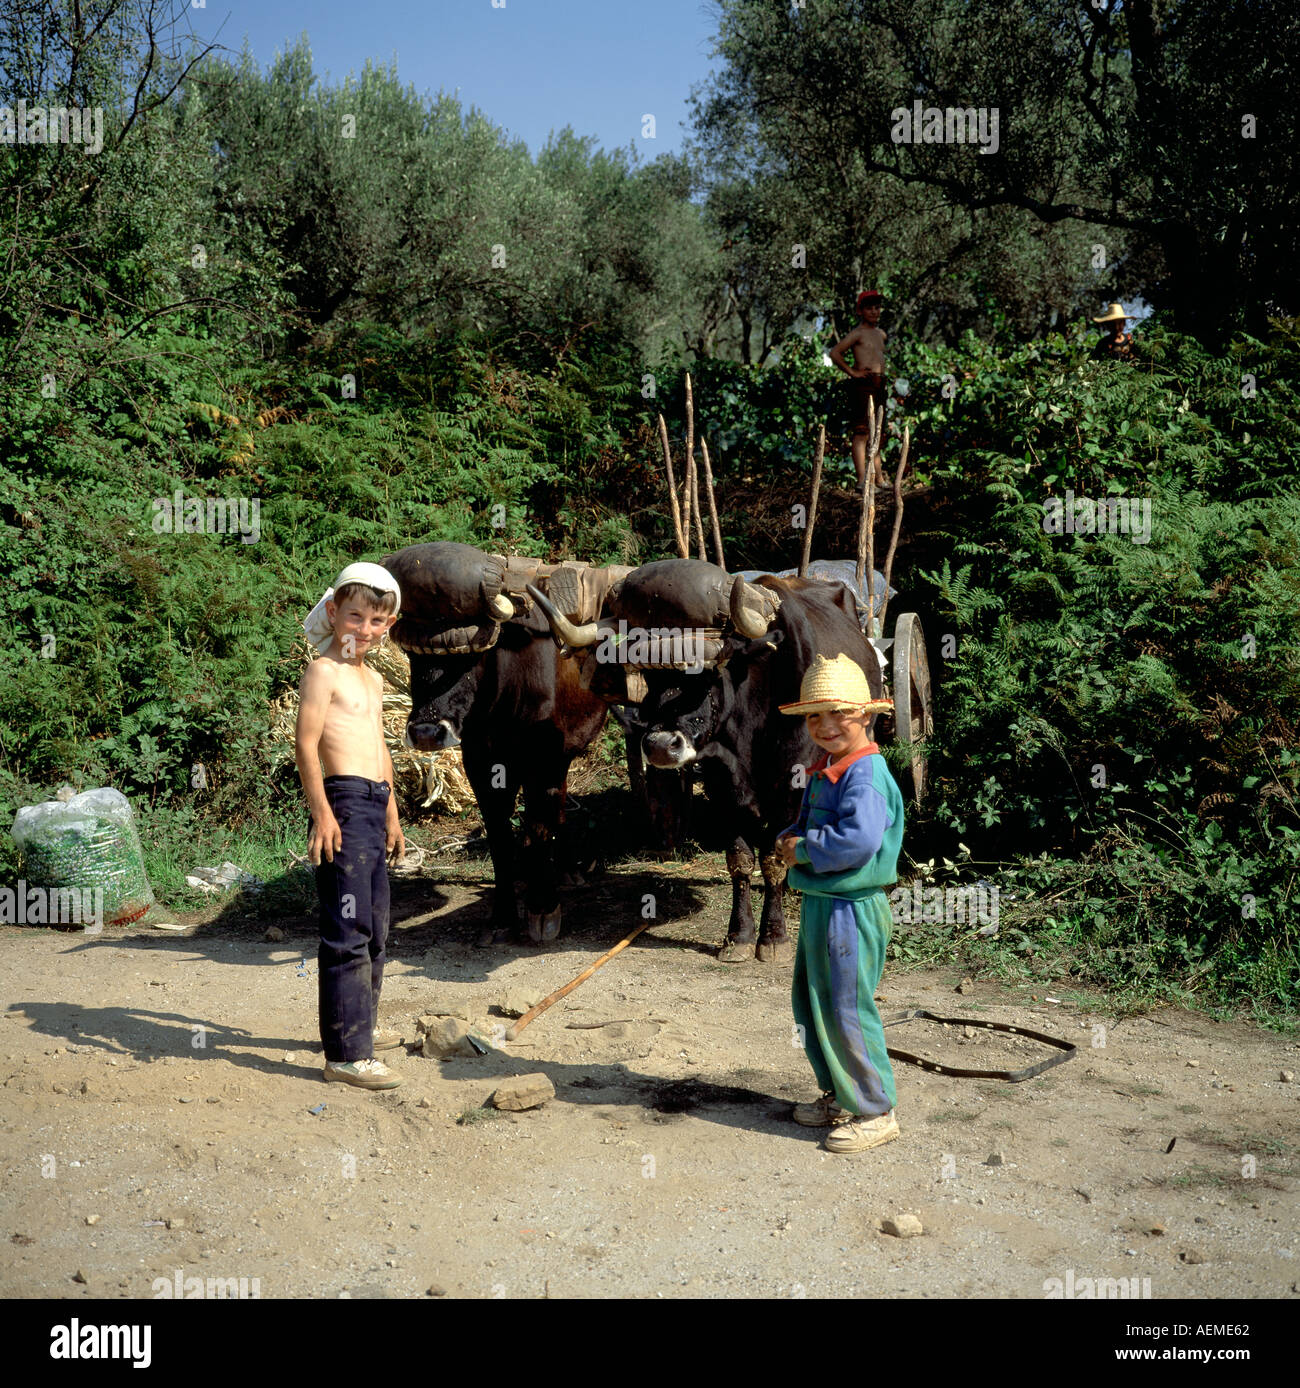 Boys with traditional oxcart loaded with bags of harvested grapes, Douro valley, Portugal Stock Photo